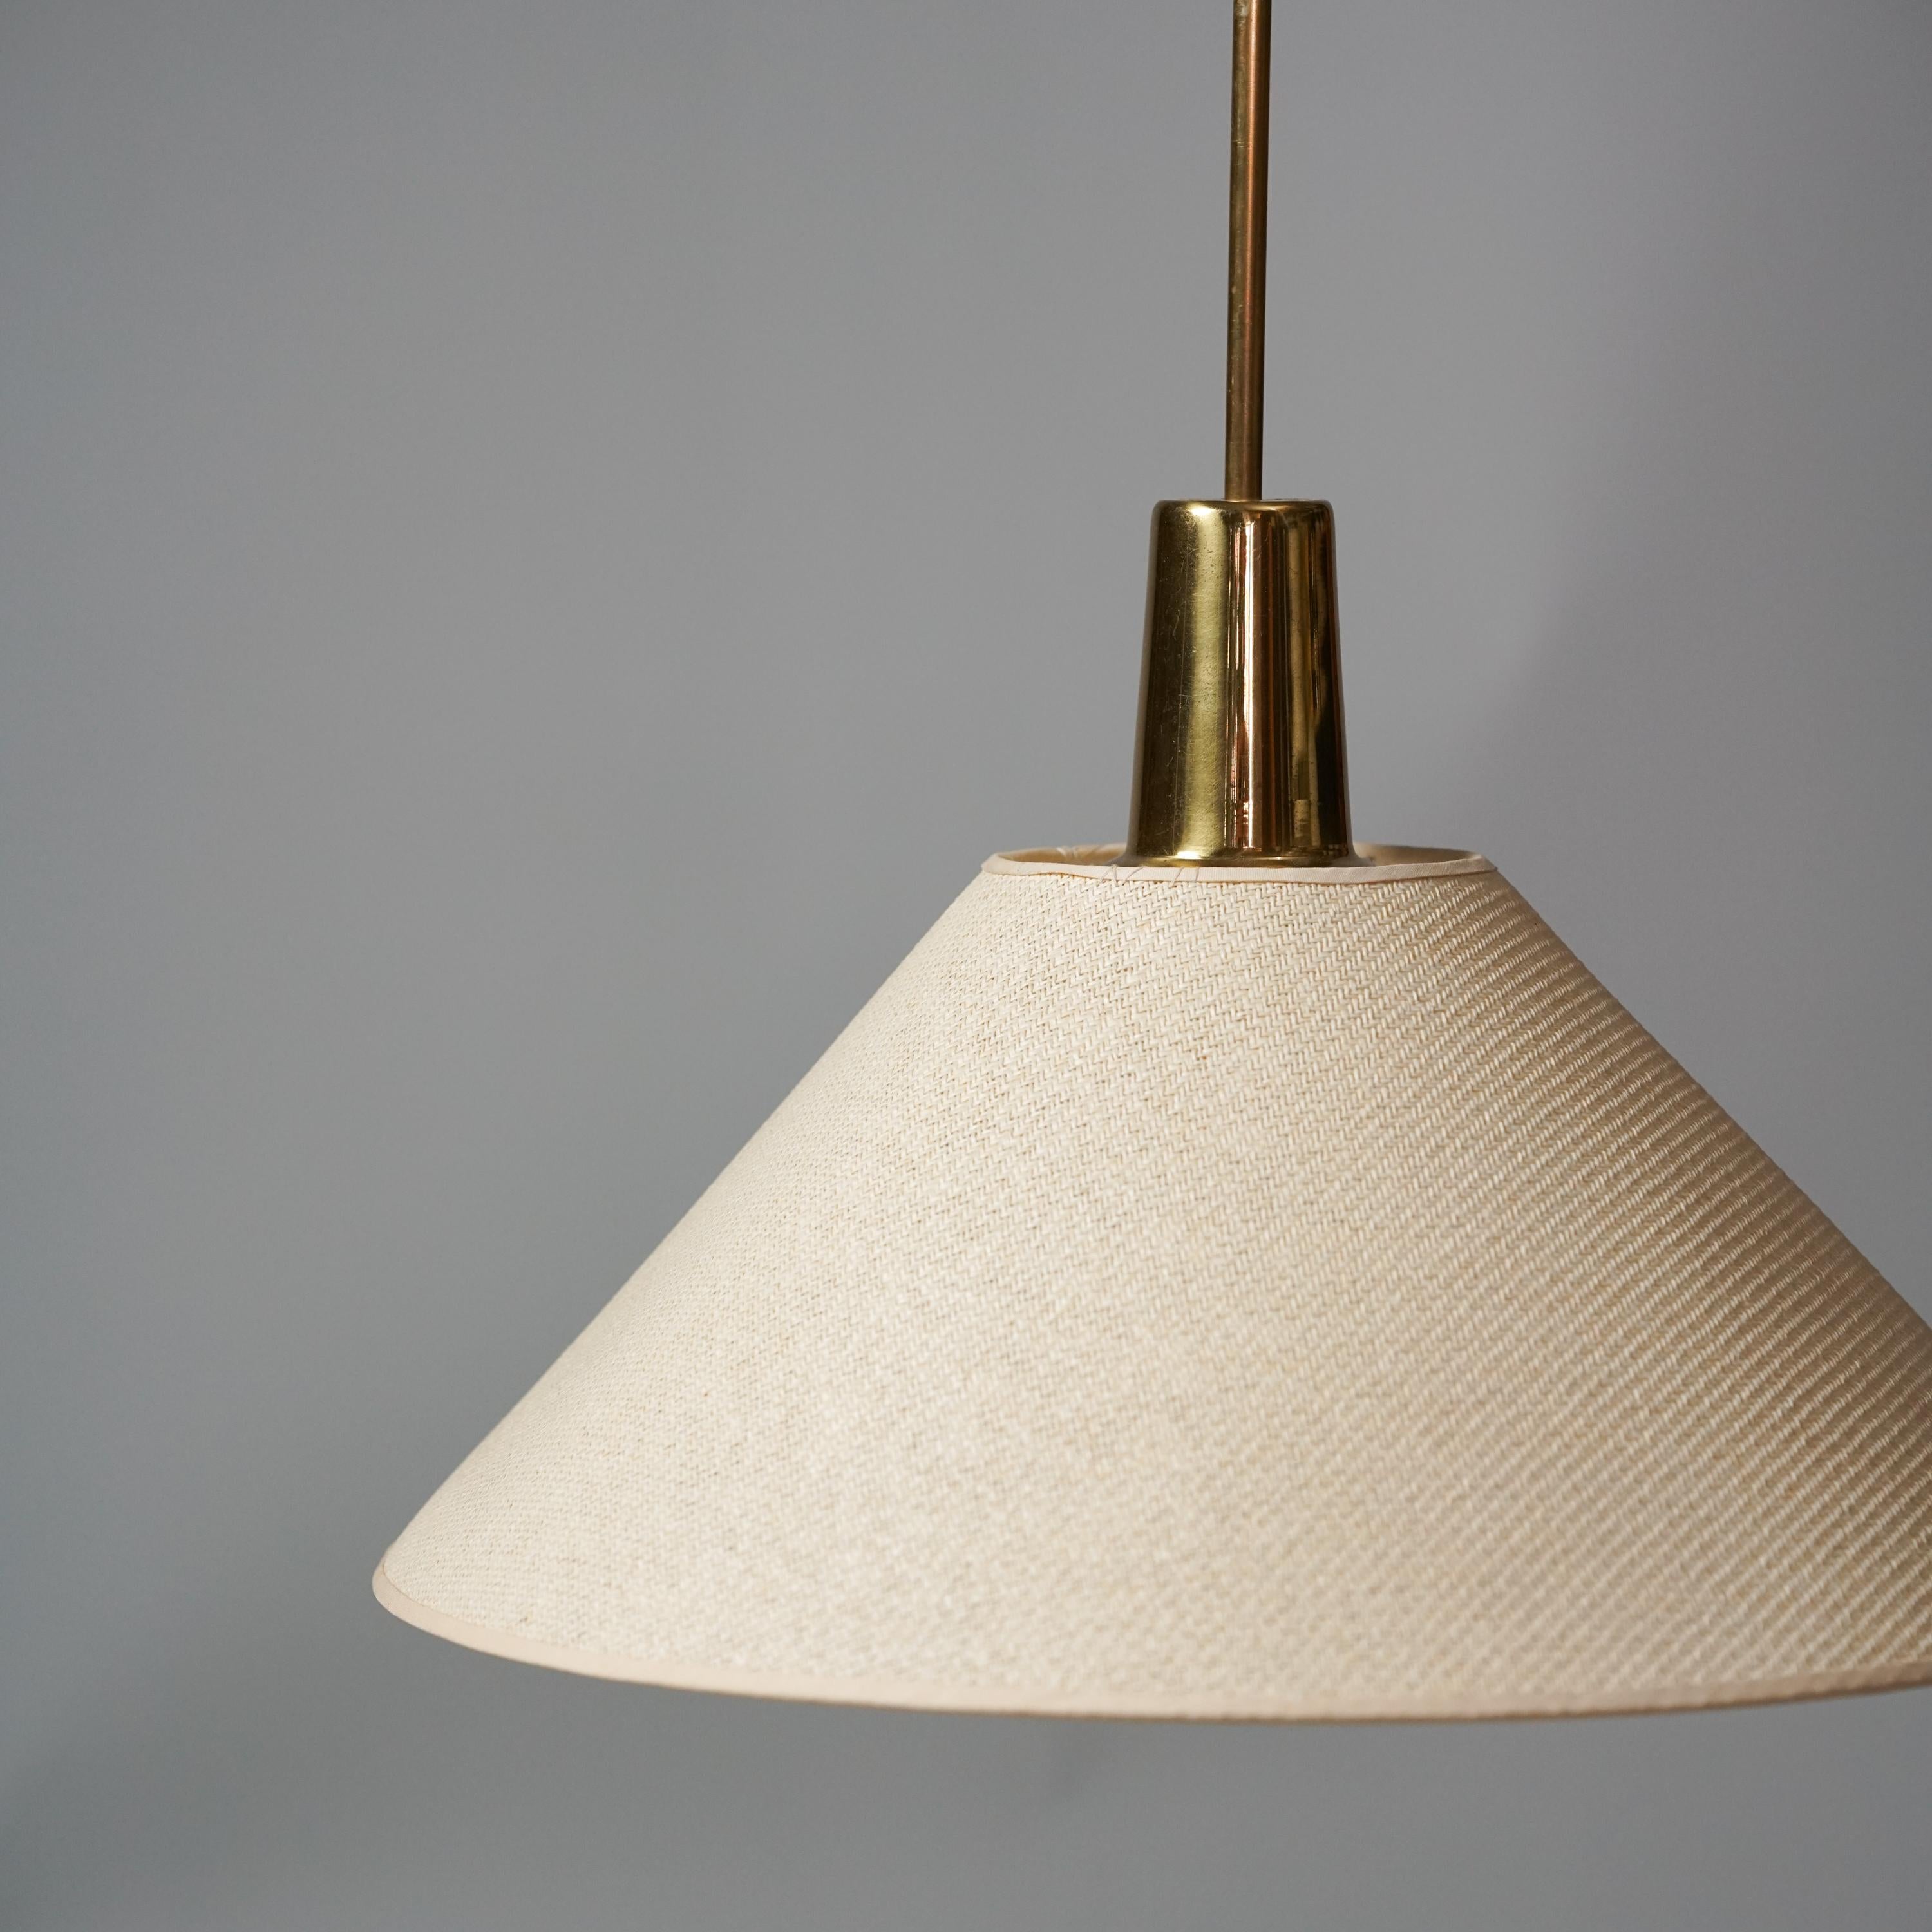 Rare Pendant by Lisa Johansson-Pape for Orno, 1950s. Brass, painted metal and fabric shade.  Good condition. 

This piece gives you beautiful light and a classic design of Lisa Johansson-Pape. 